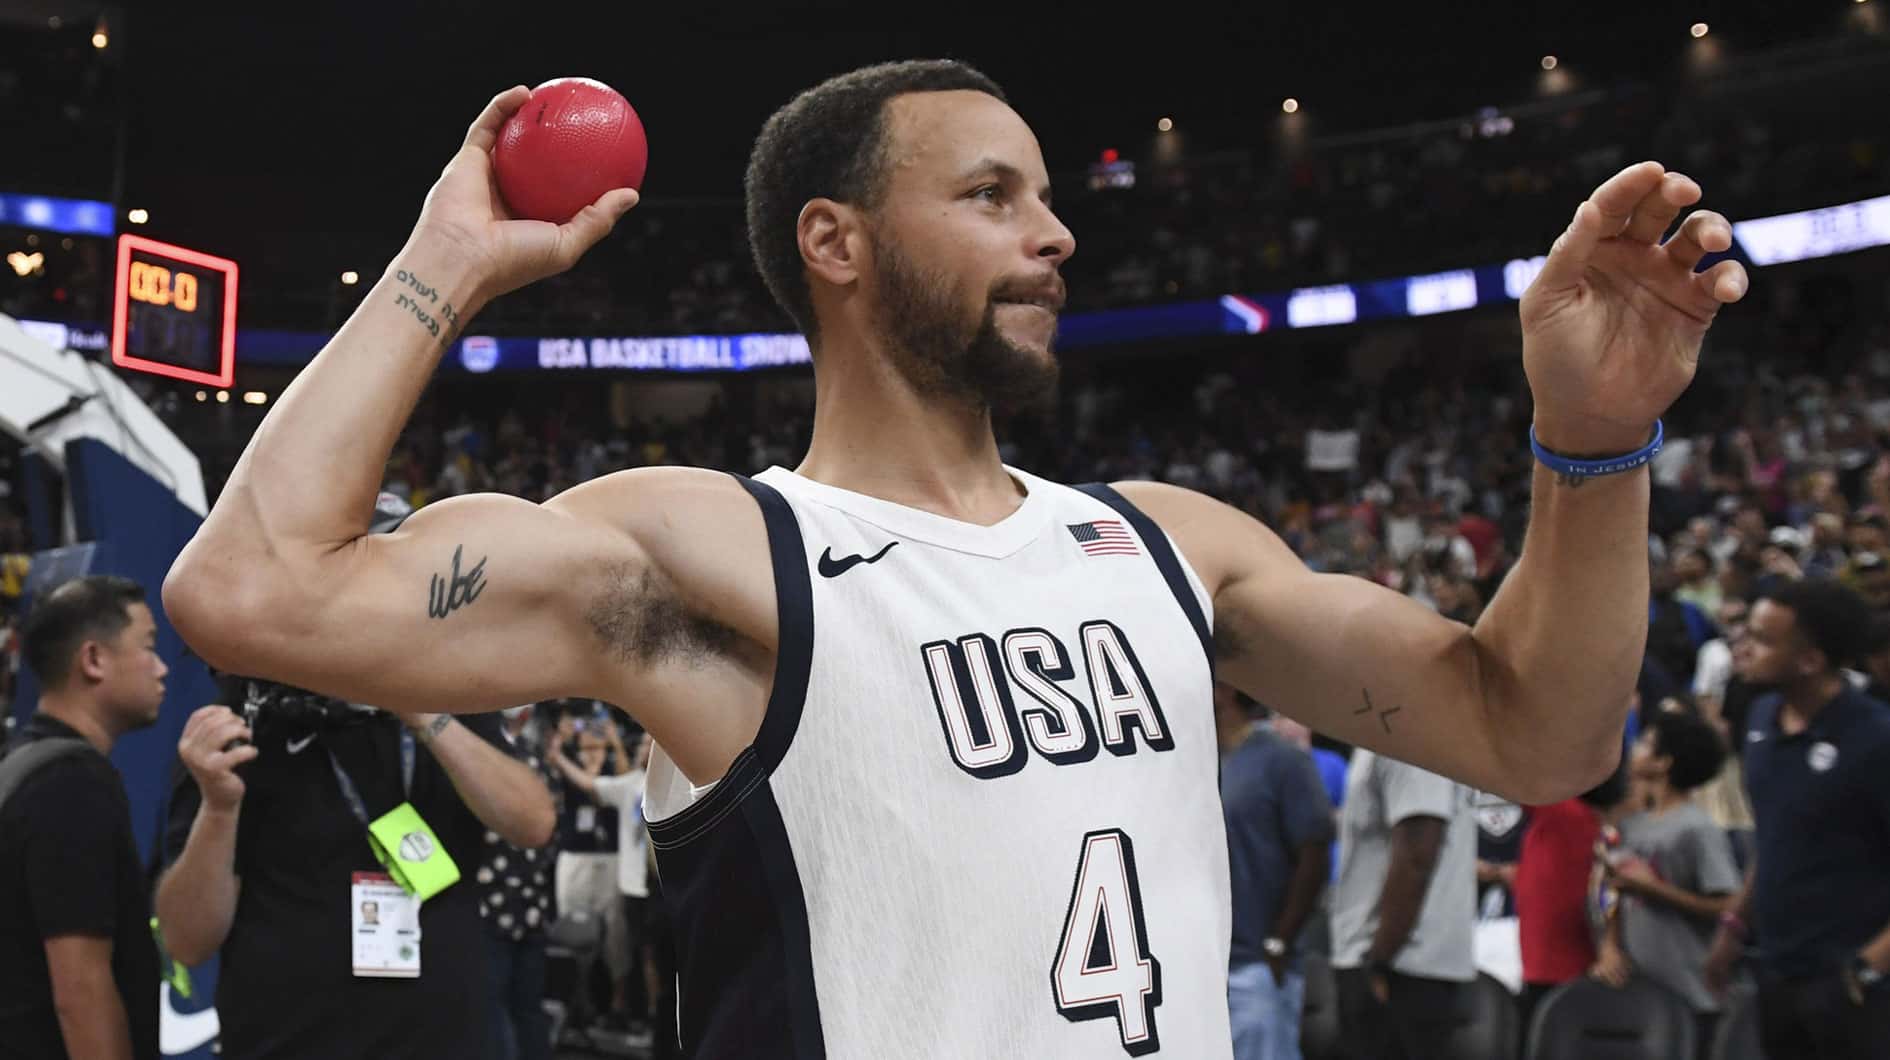 USA guard Steph Curry (4) throws a ball to the fans after defeating Canada in the USA Basketball Showcase at T-Mobile Arena